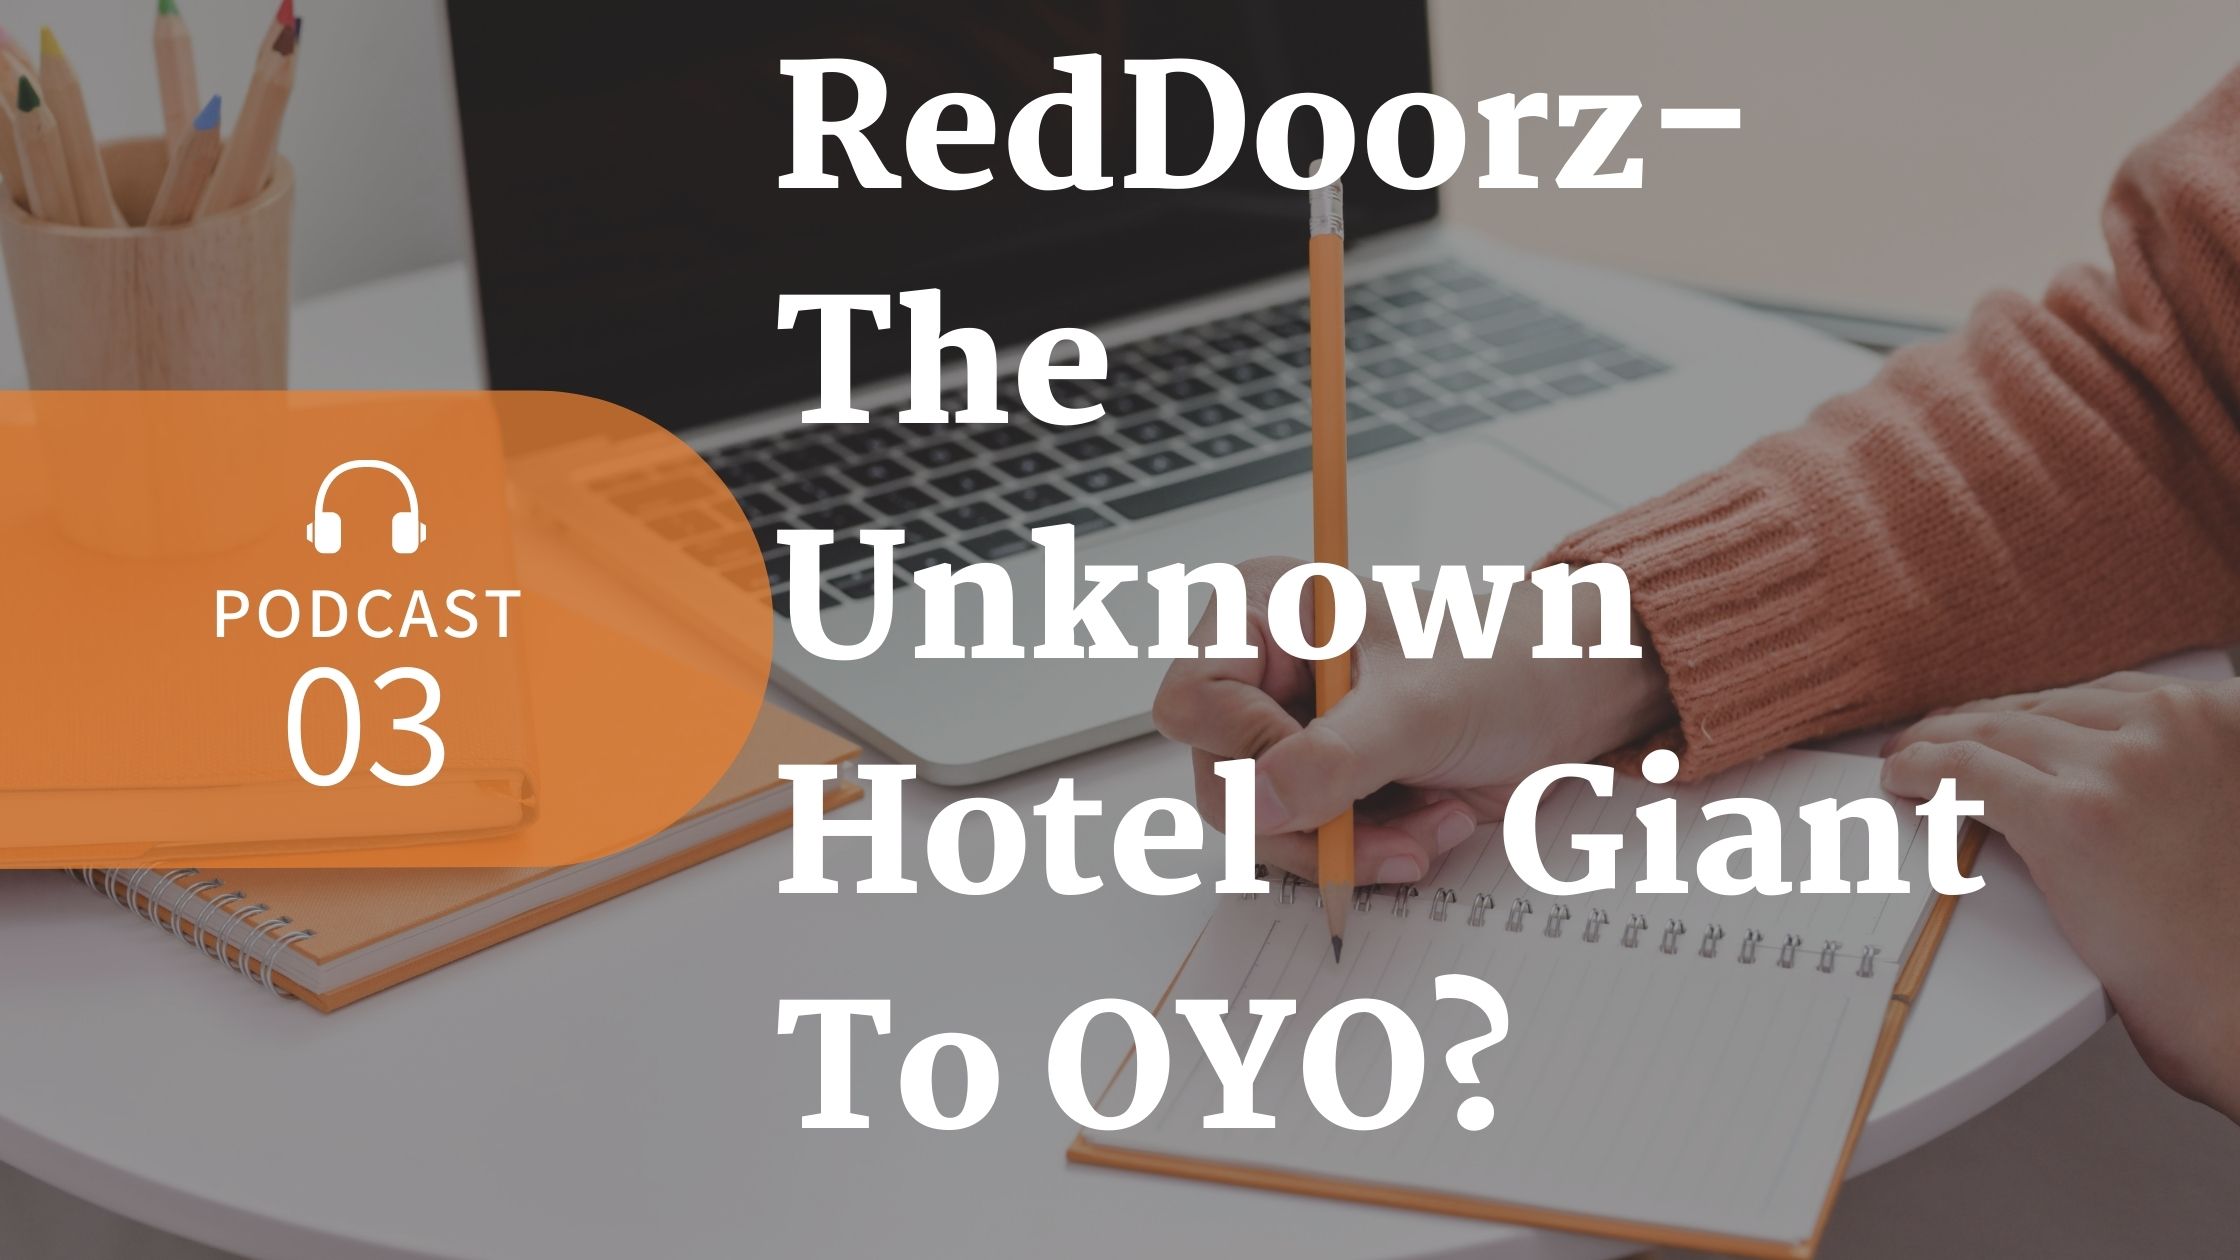 RedDoorz- The Unknown Hotel Giant To OYO